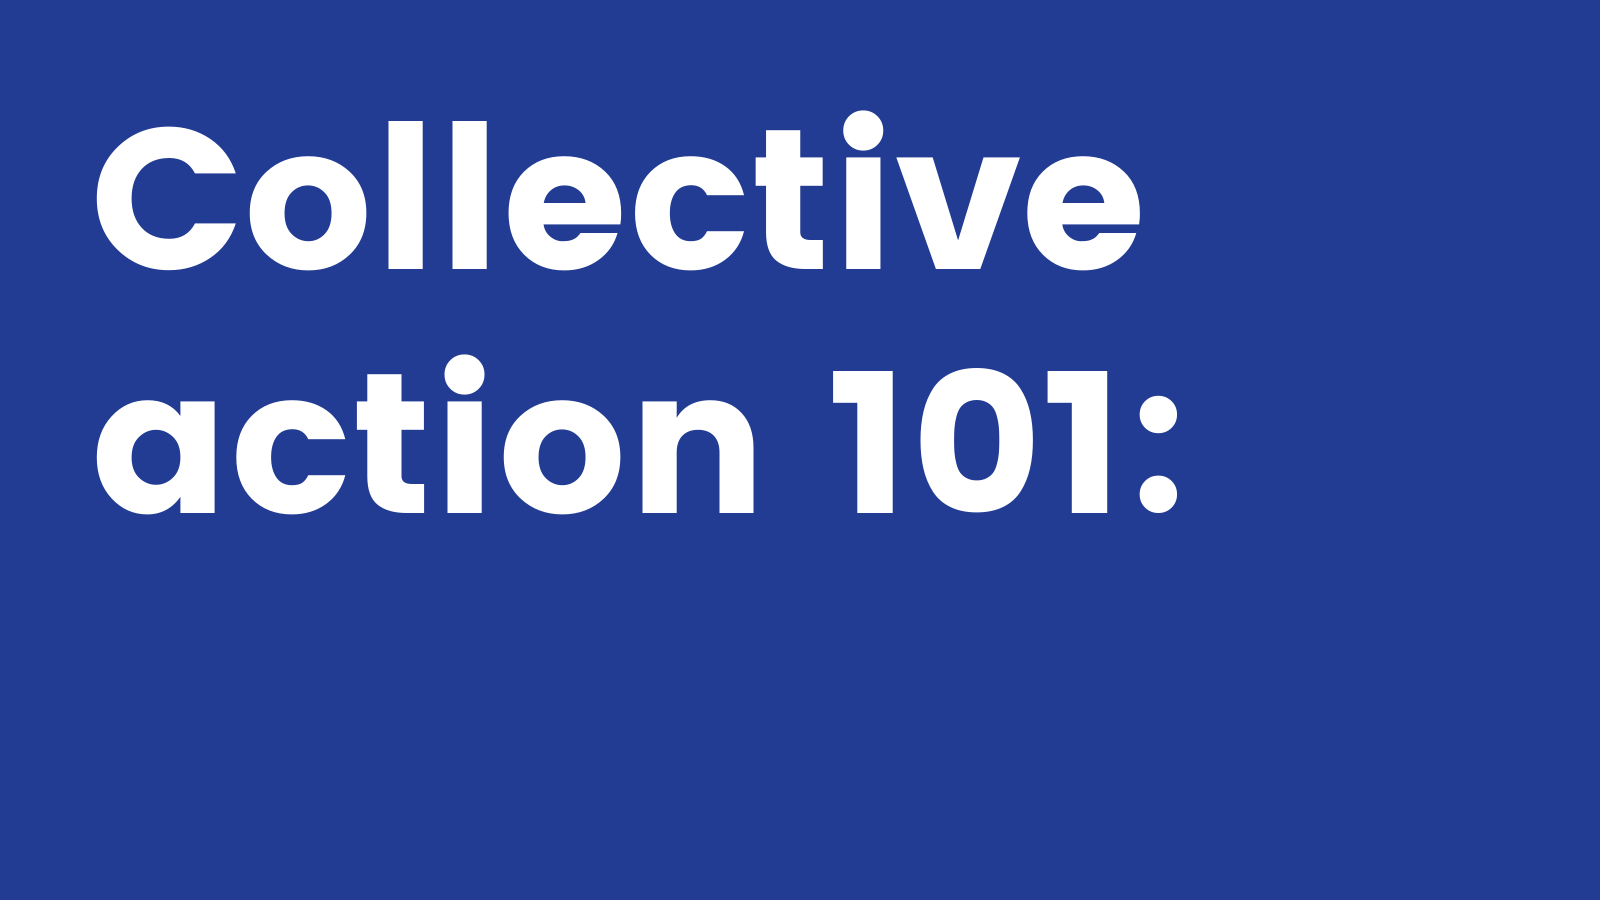 Collective action 101: Mobilizing to win